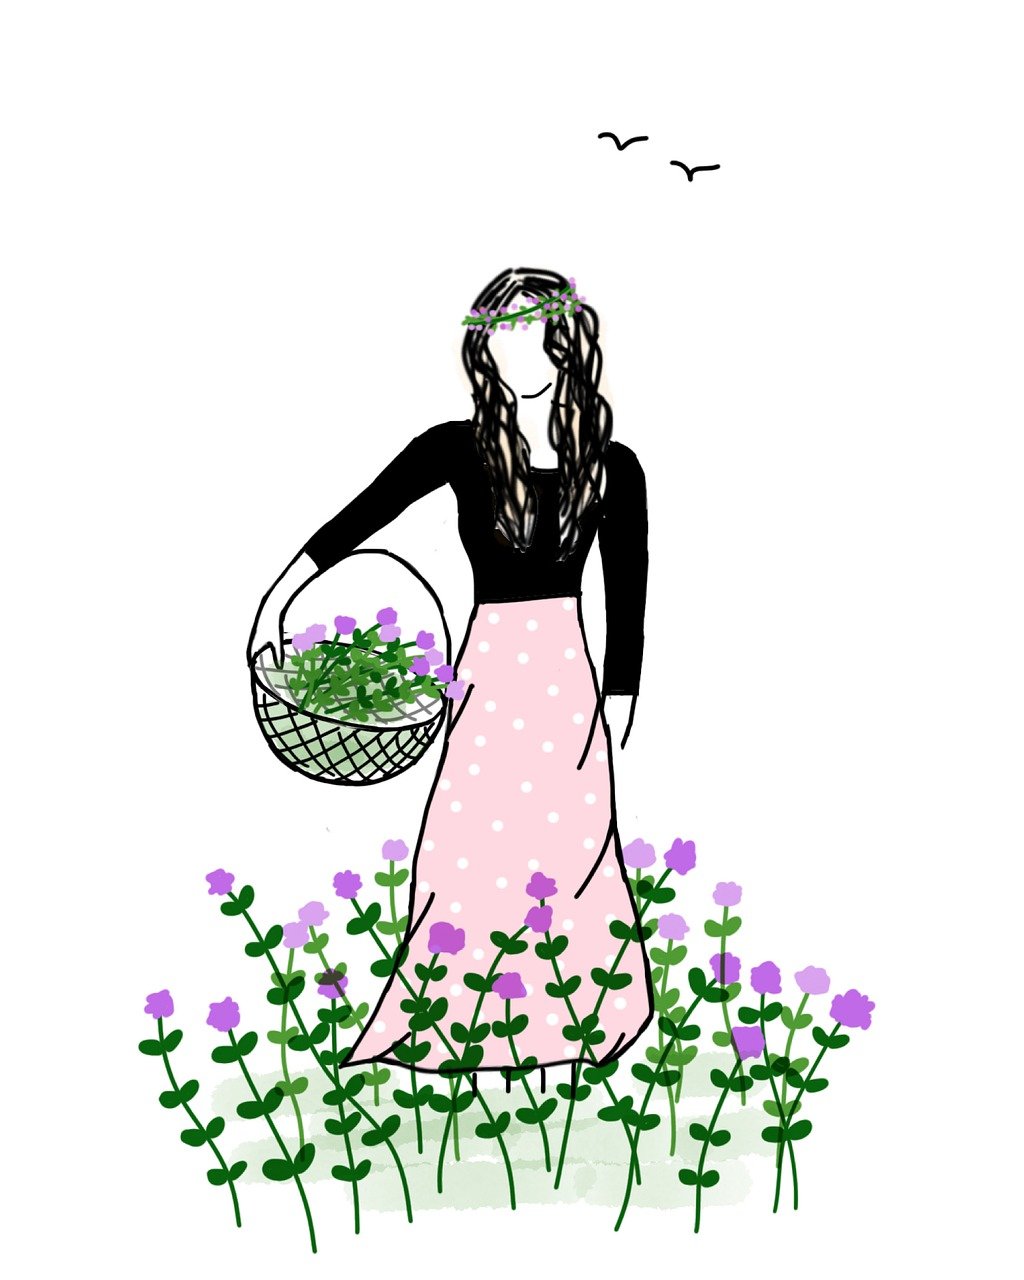 a drawing of a woman holding a basket of flowers, a picture, naive art, field of flowers background, herbs, simple and clean illustration, verbena